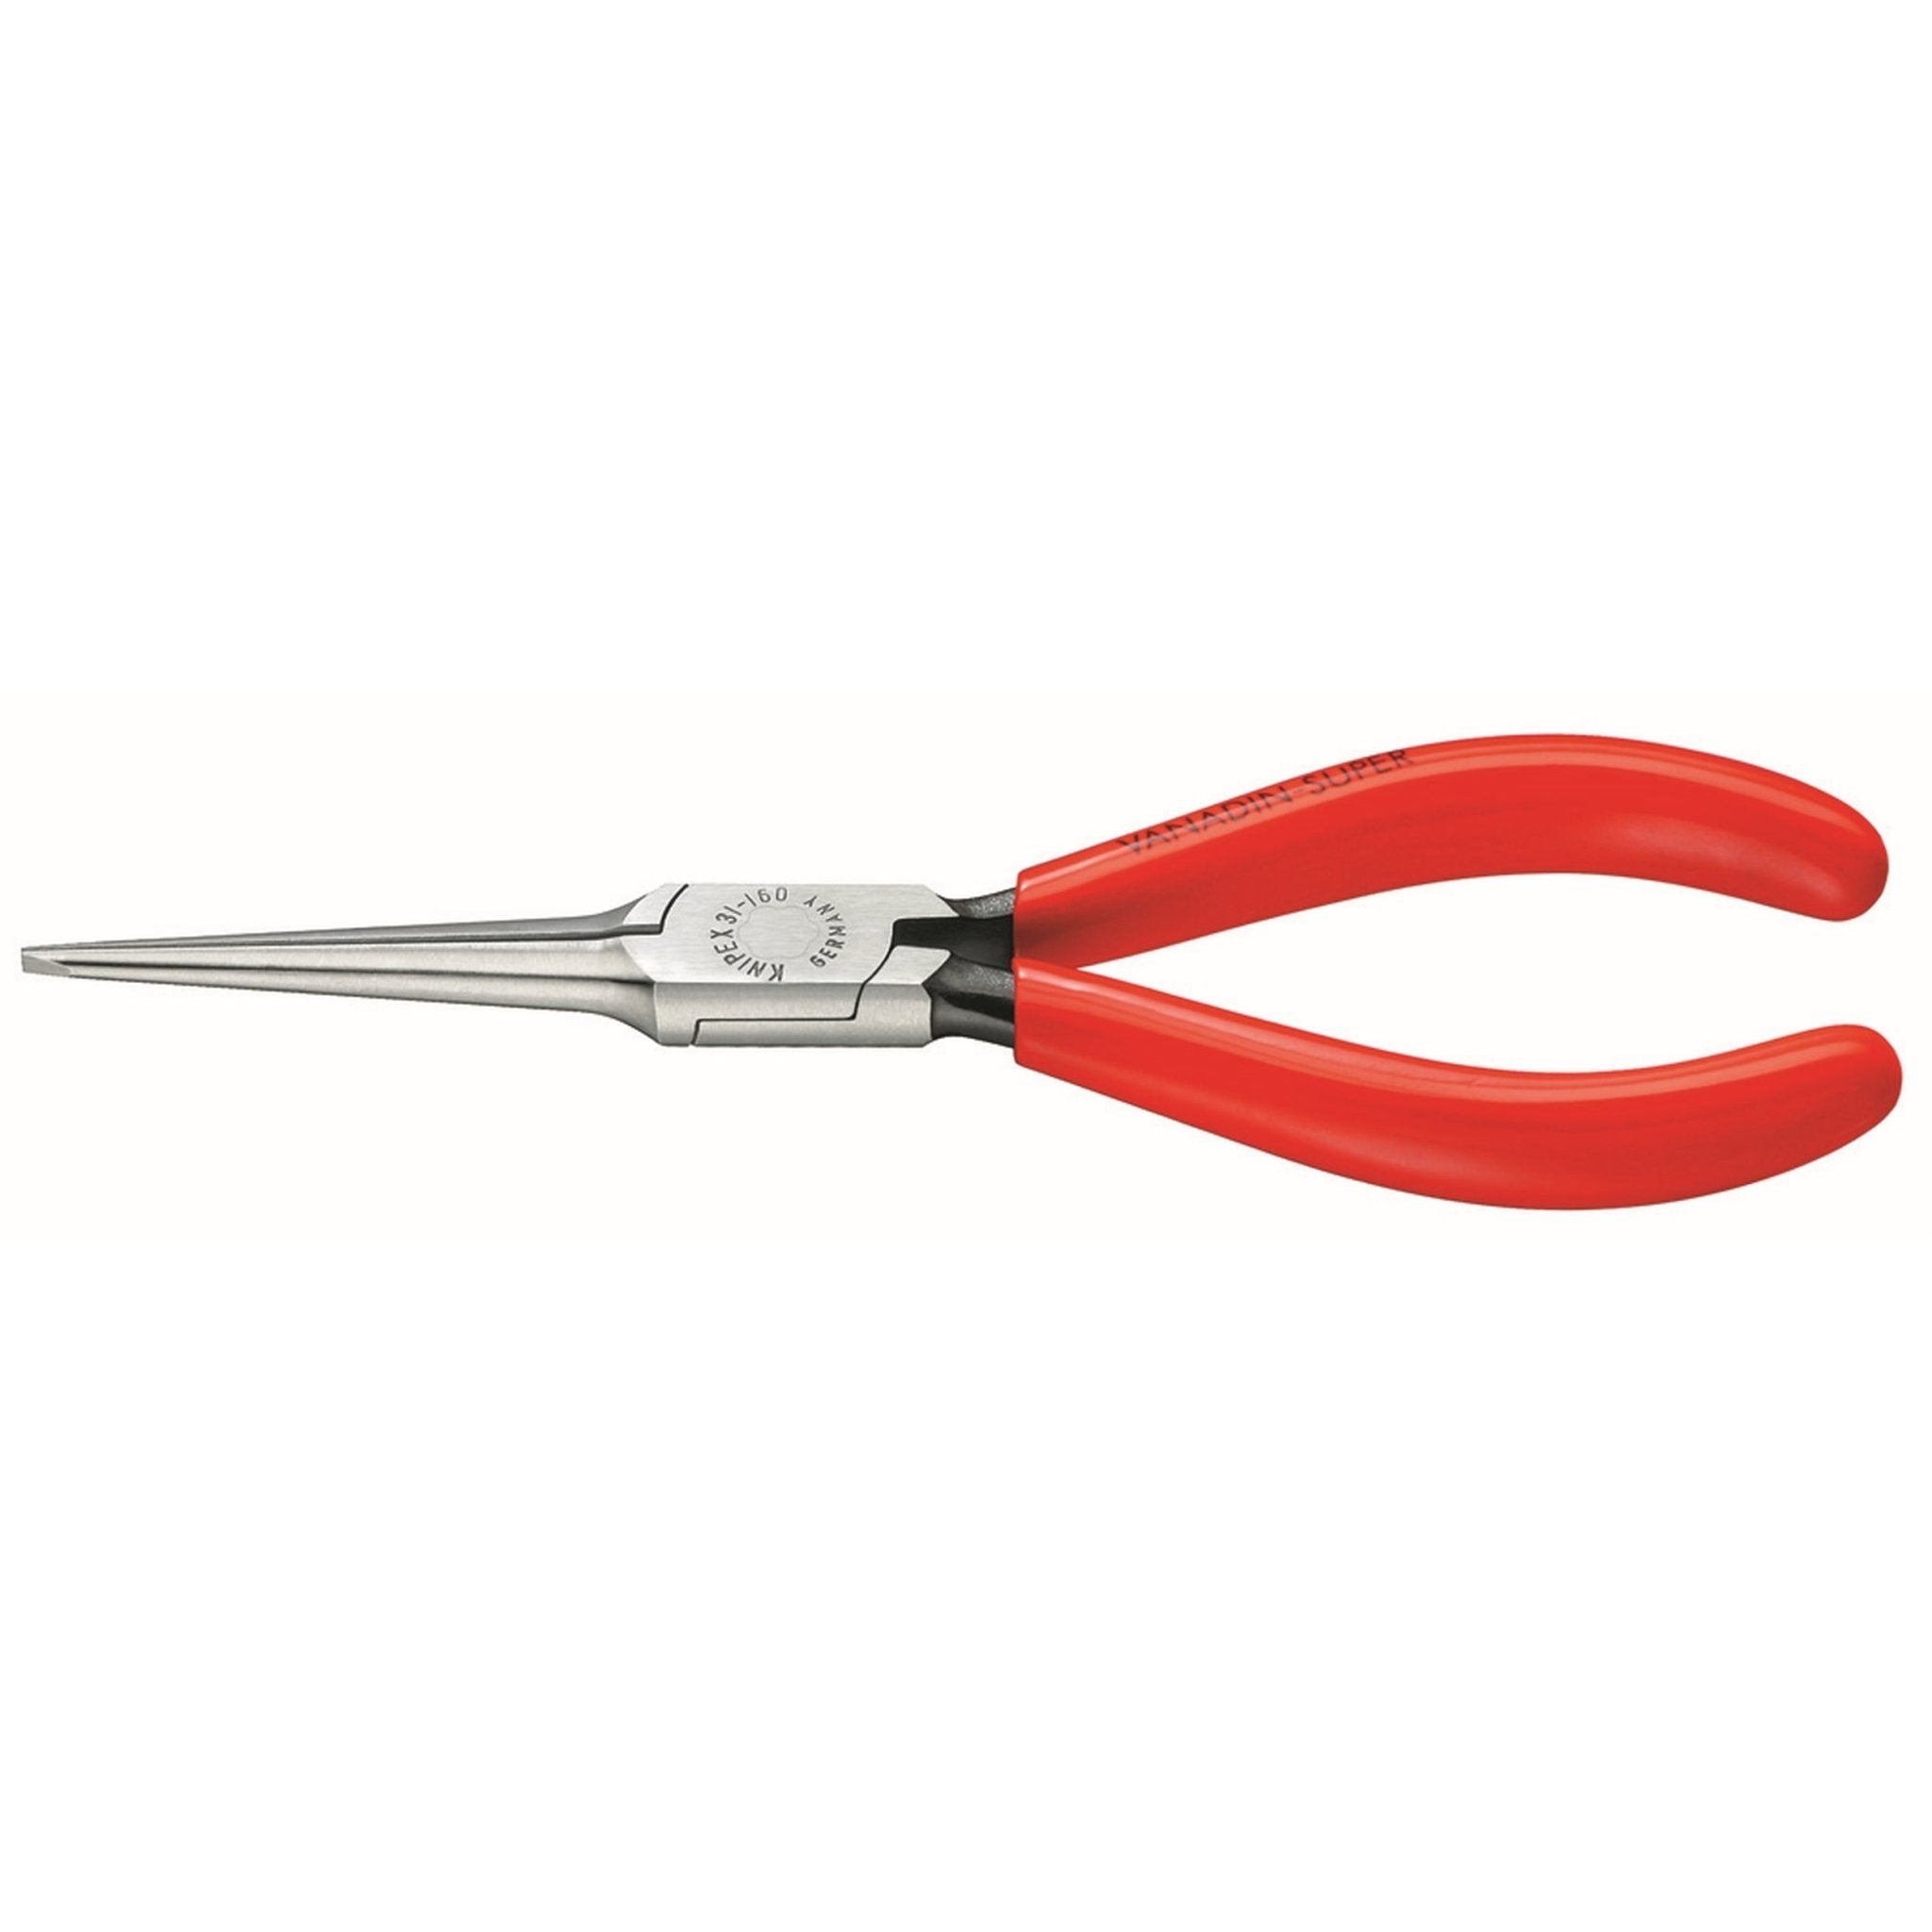 KNIPEX 6 - 1/4'' Needle Nose Pliers with Angled Comfort Grip